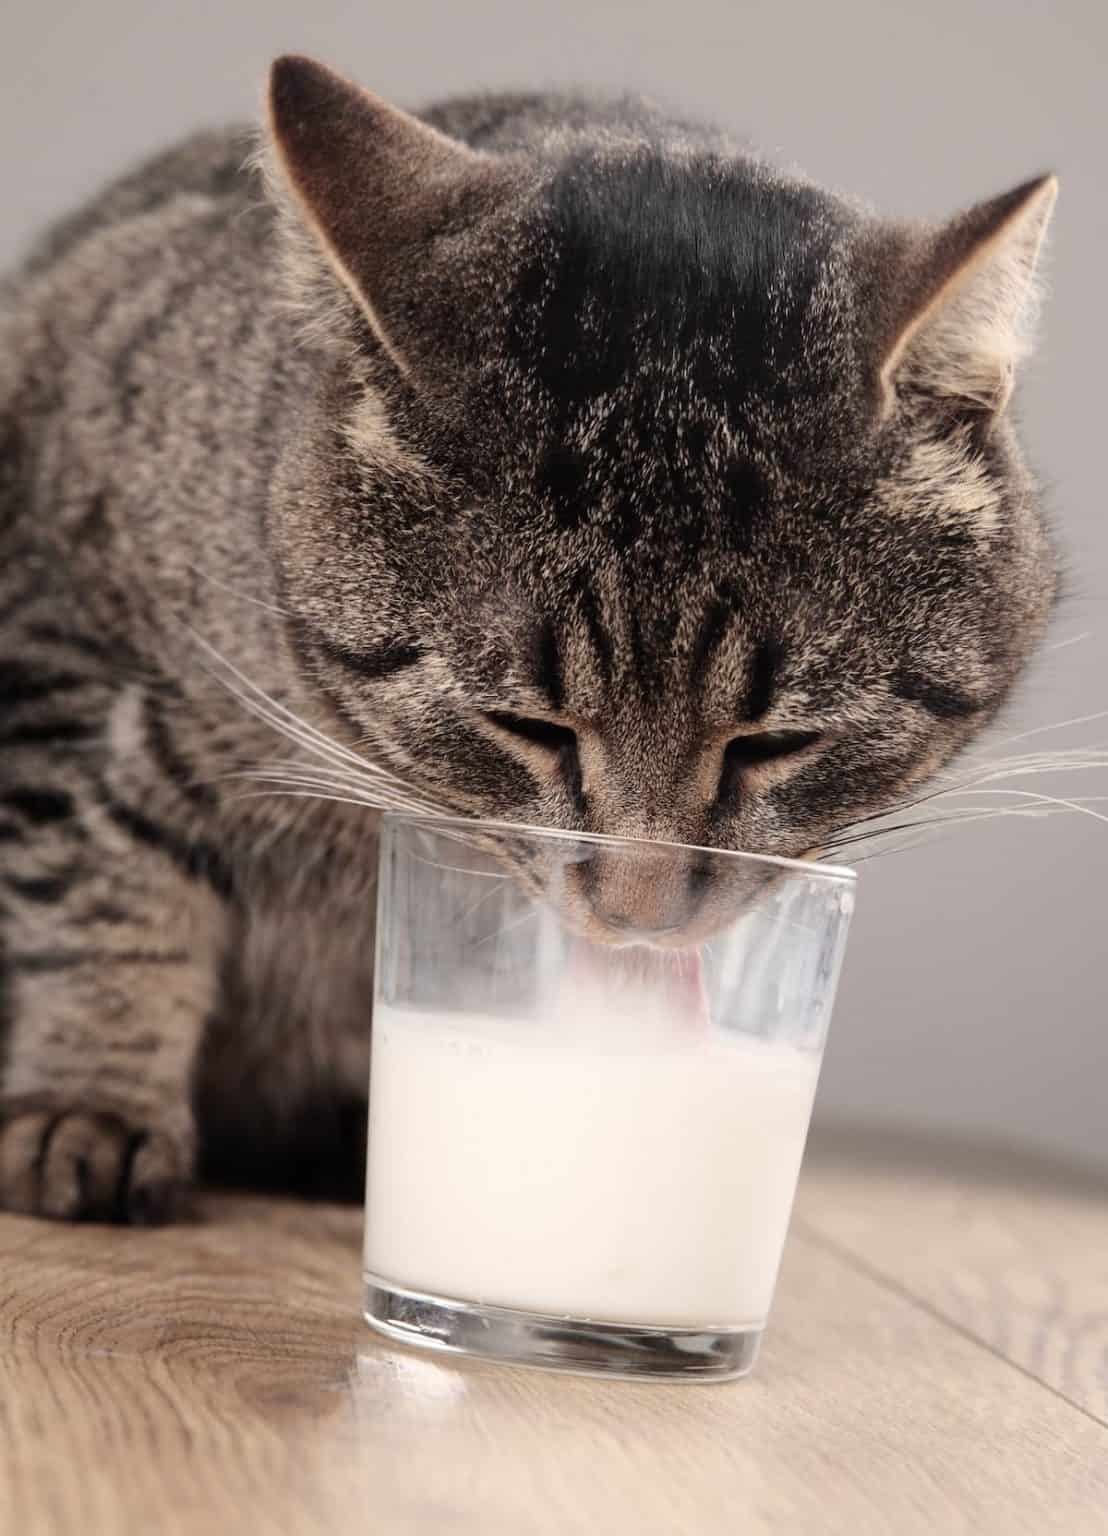 Can Cats Have Evaporated Milk Is It Safe?